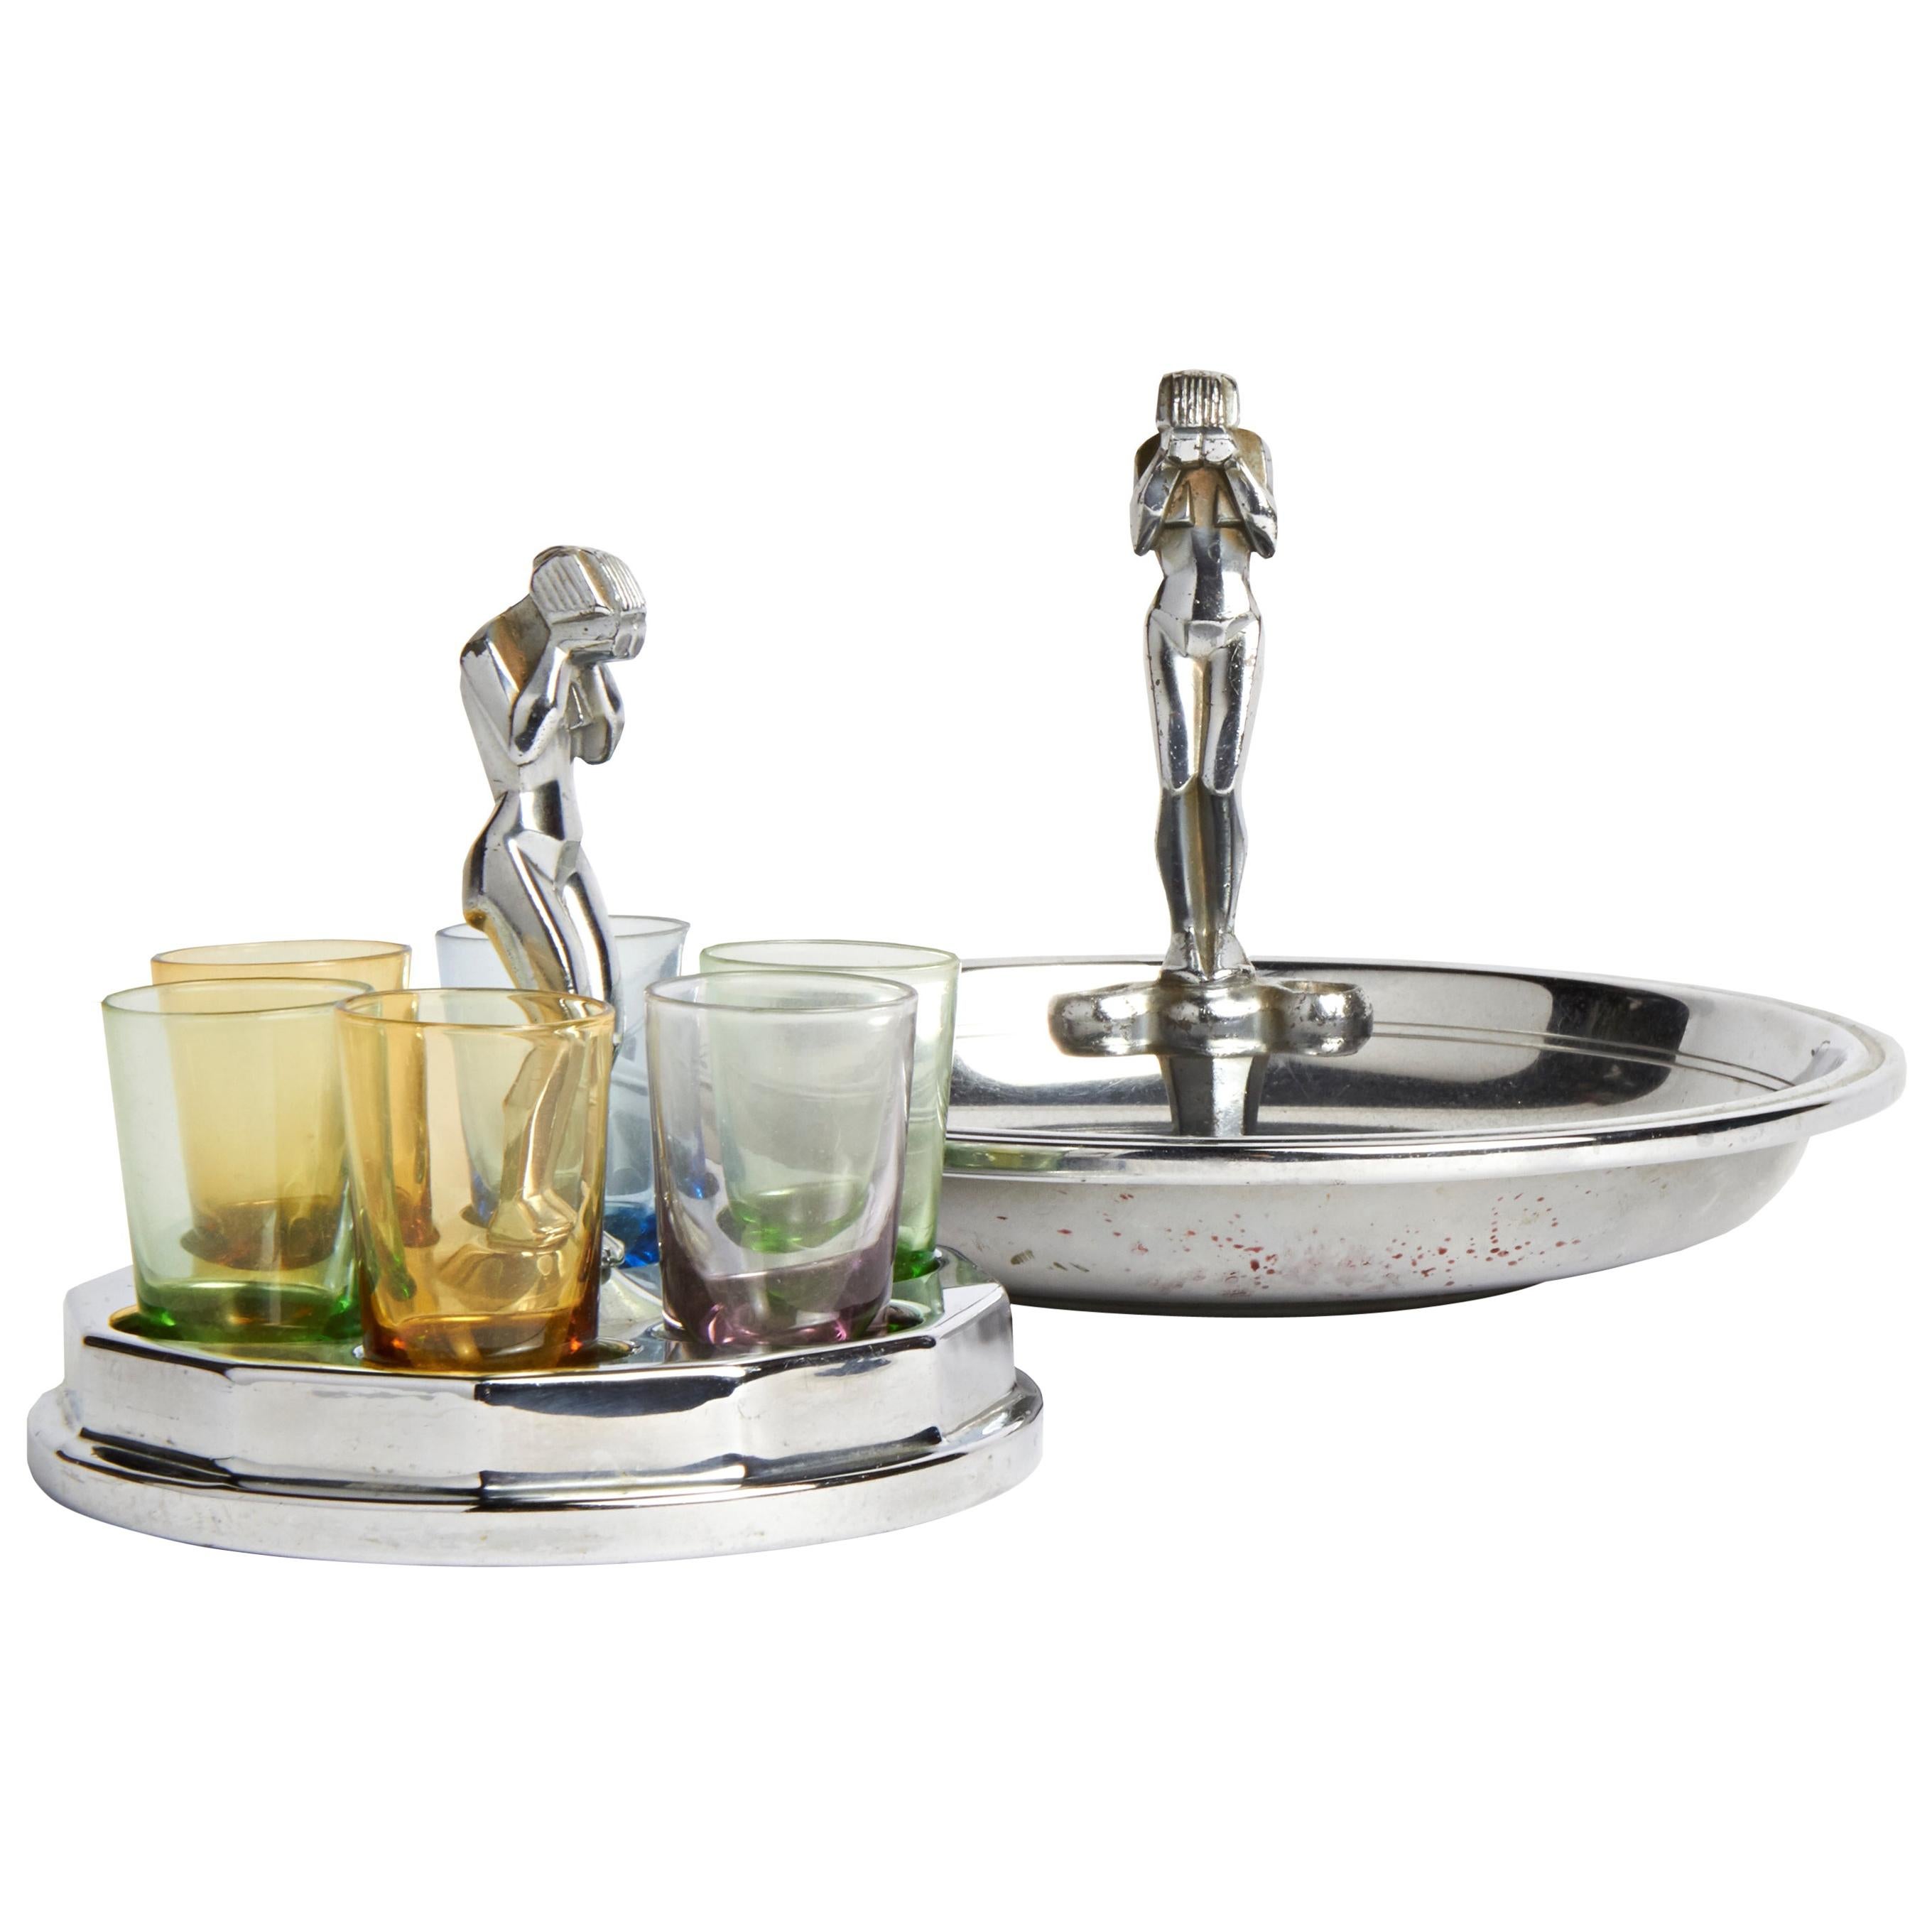 American Art Deco Chrome Weeping Woman Party Ashtray & Liqueur Glass Holder Set For Sale